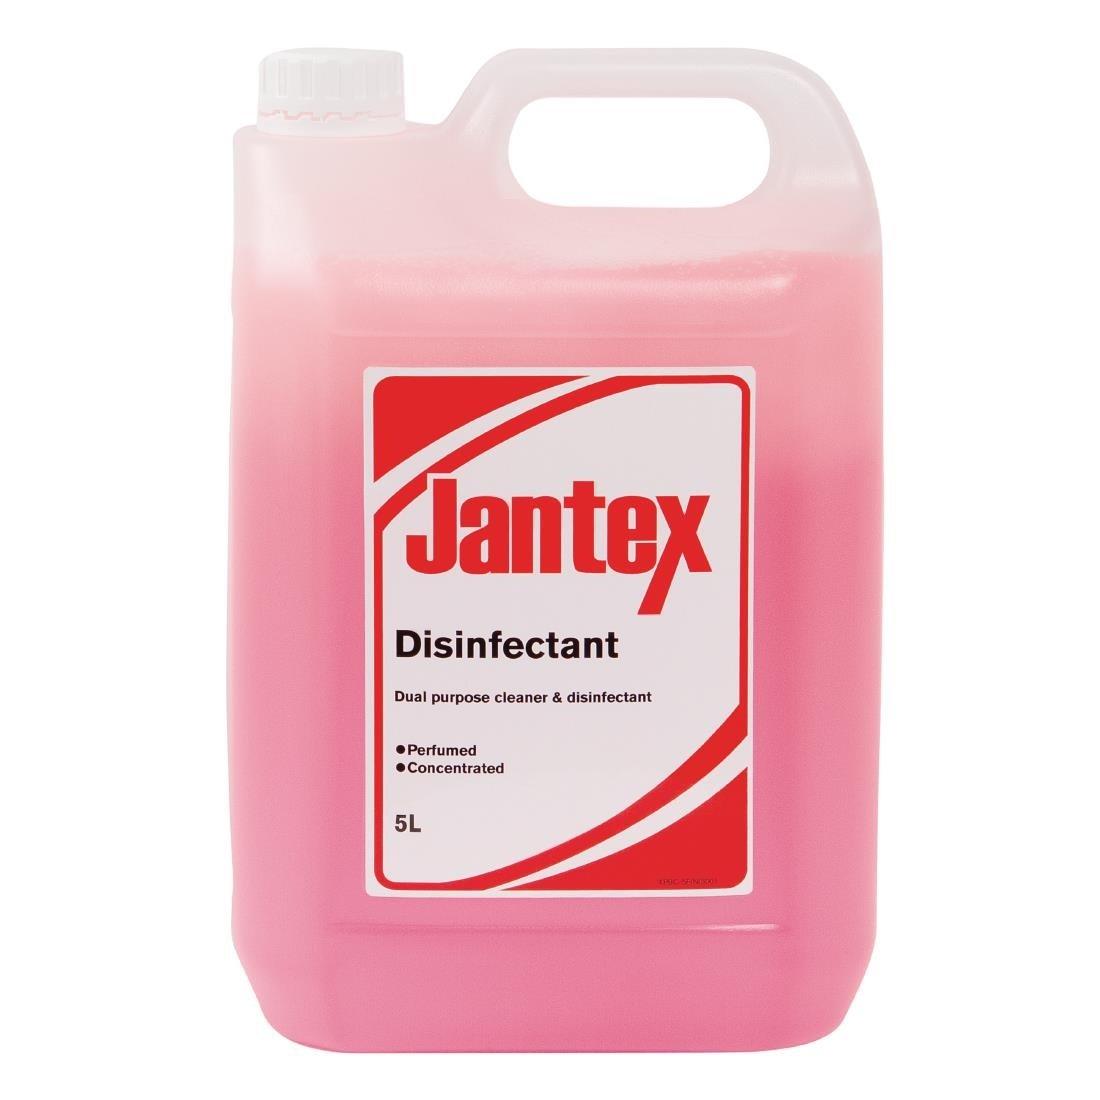 Jantex Dual Purpose Cleaner and Disinfectant Twin Pack - 2 x 5 Litre - CW709 - 1